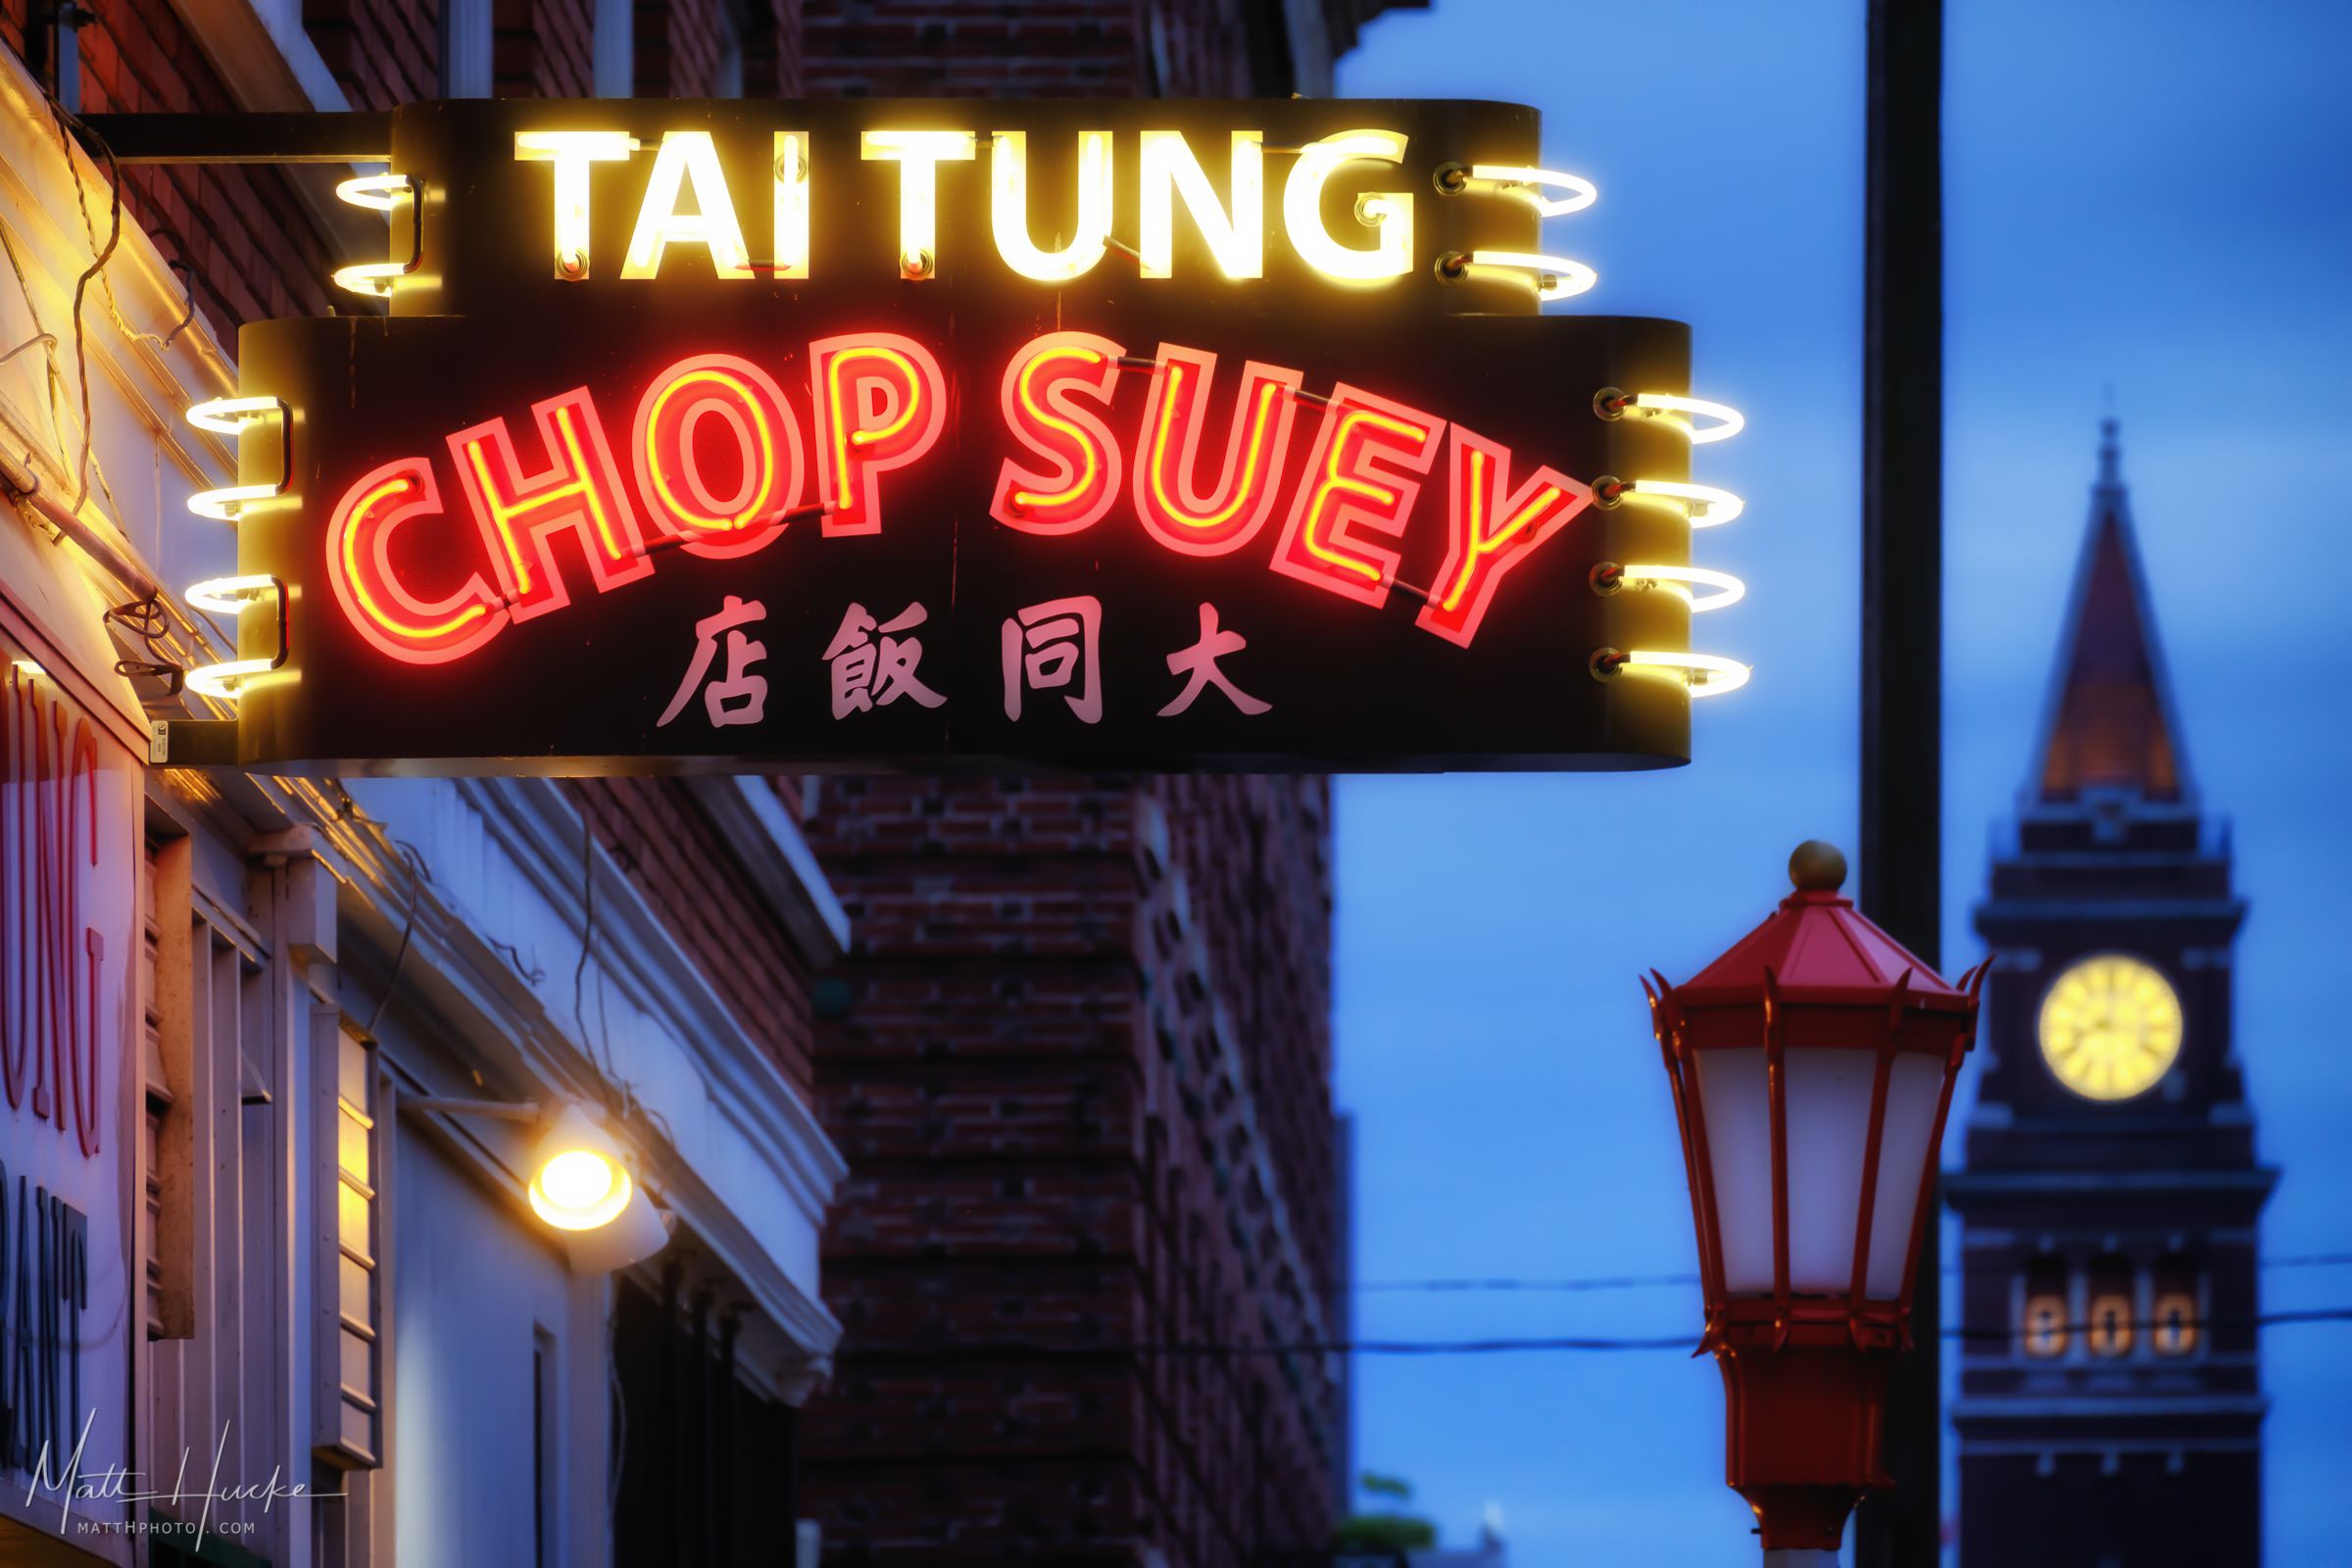 A neon sign in Seattle's International District says "Taitung Chop Suey". 